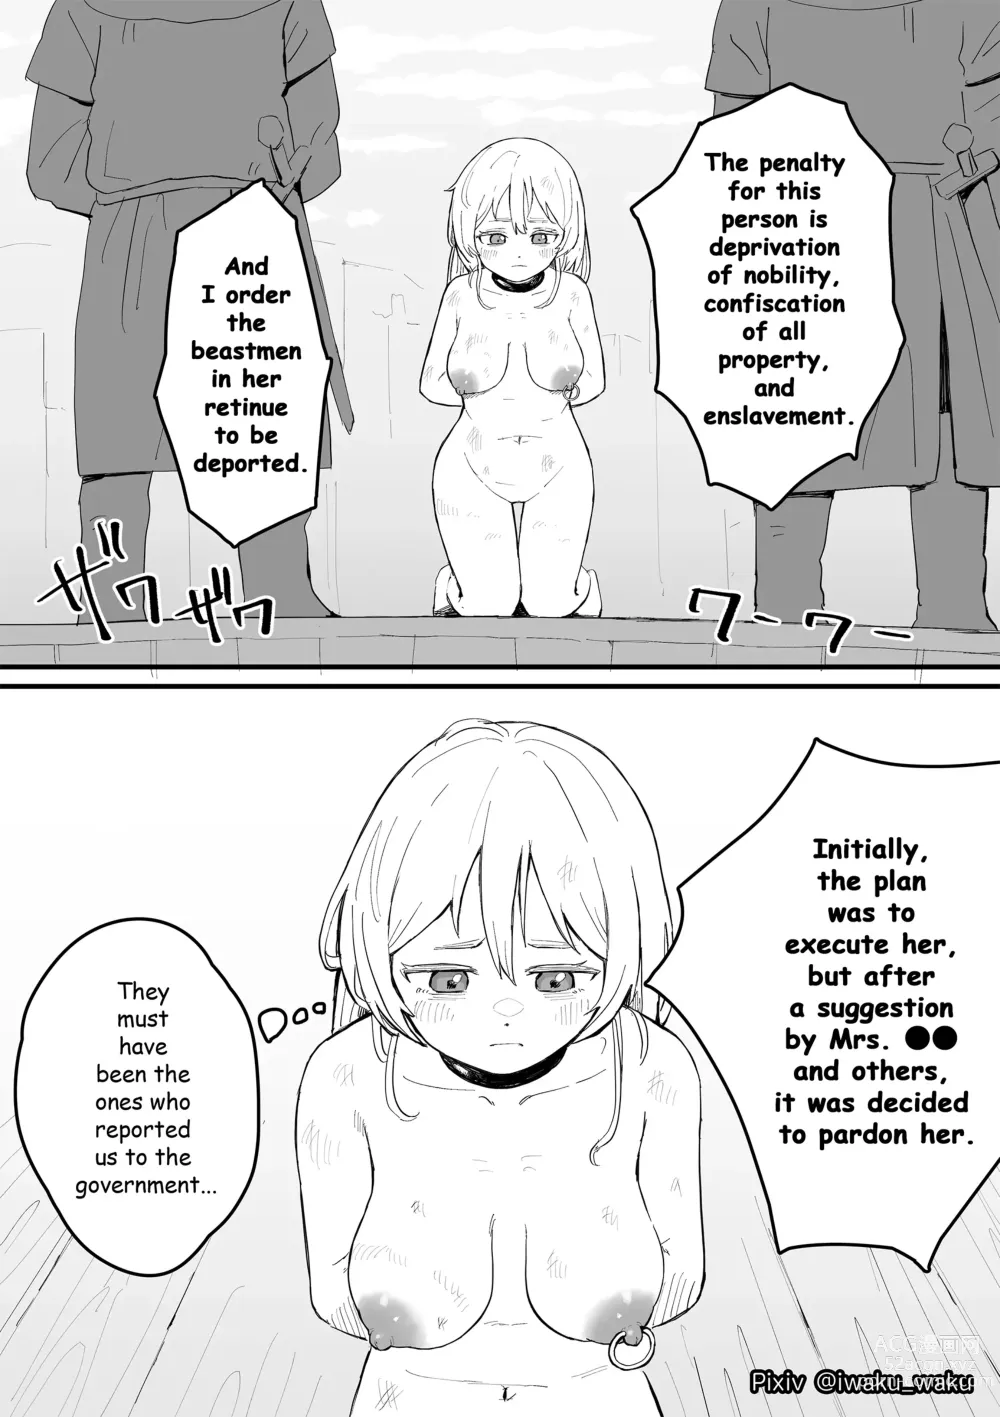 Page 7 of doujinshi Punishment for Elena